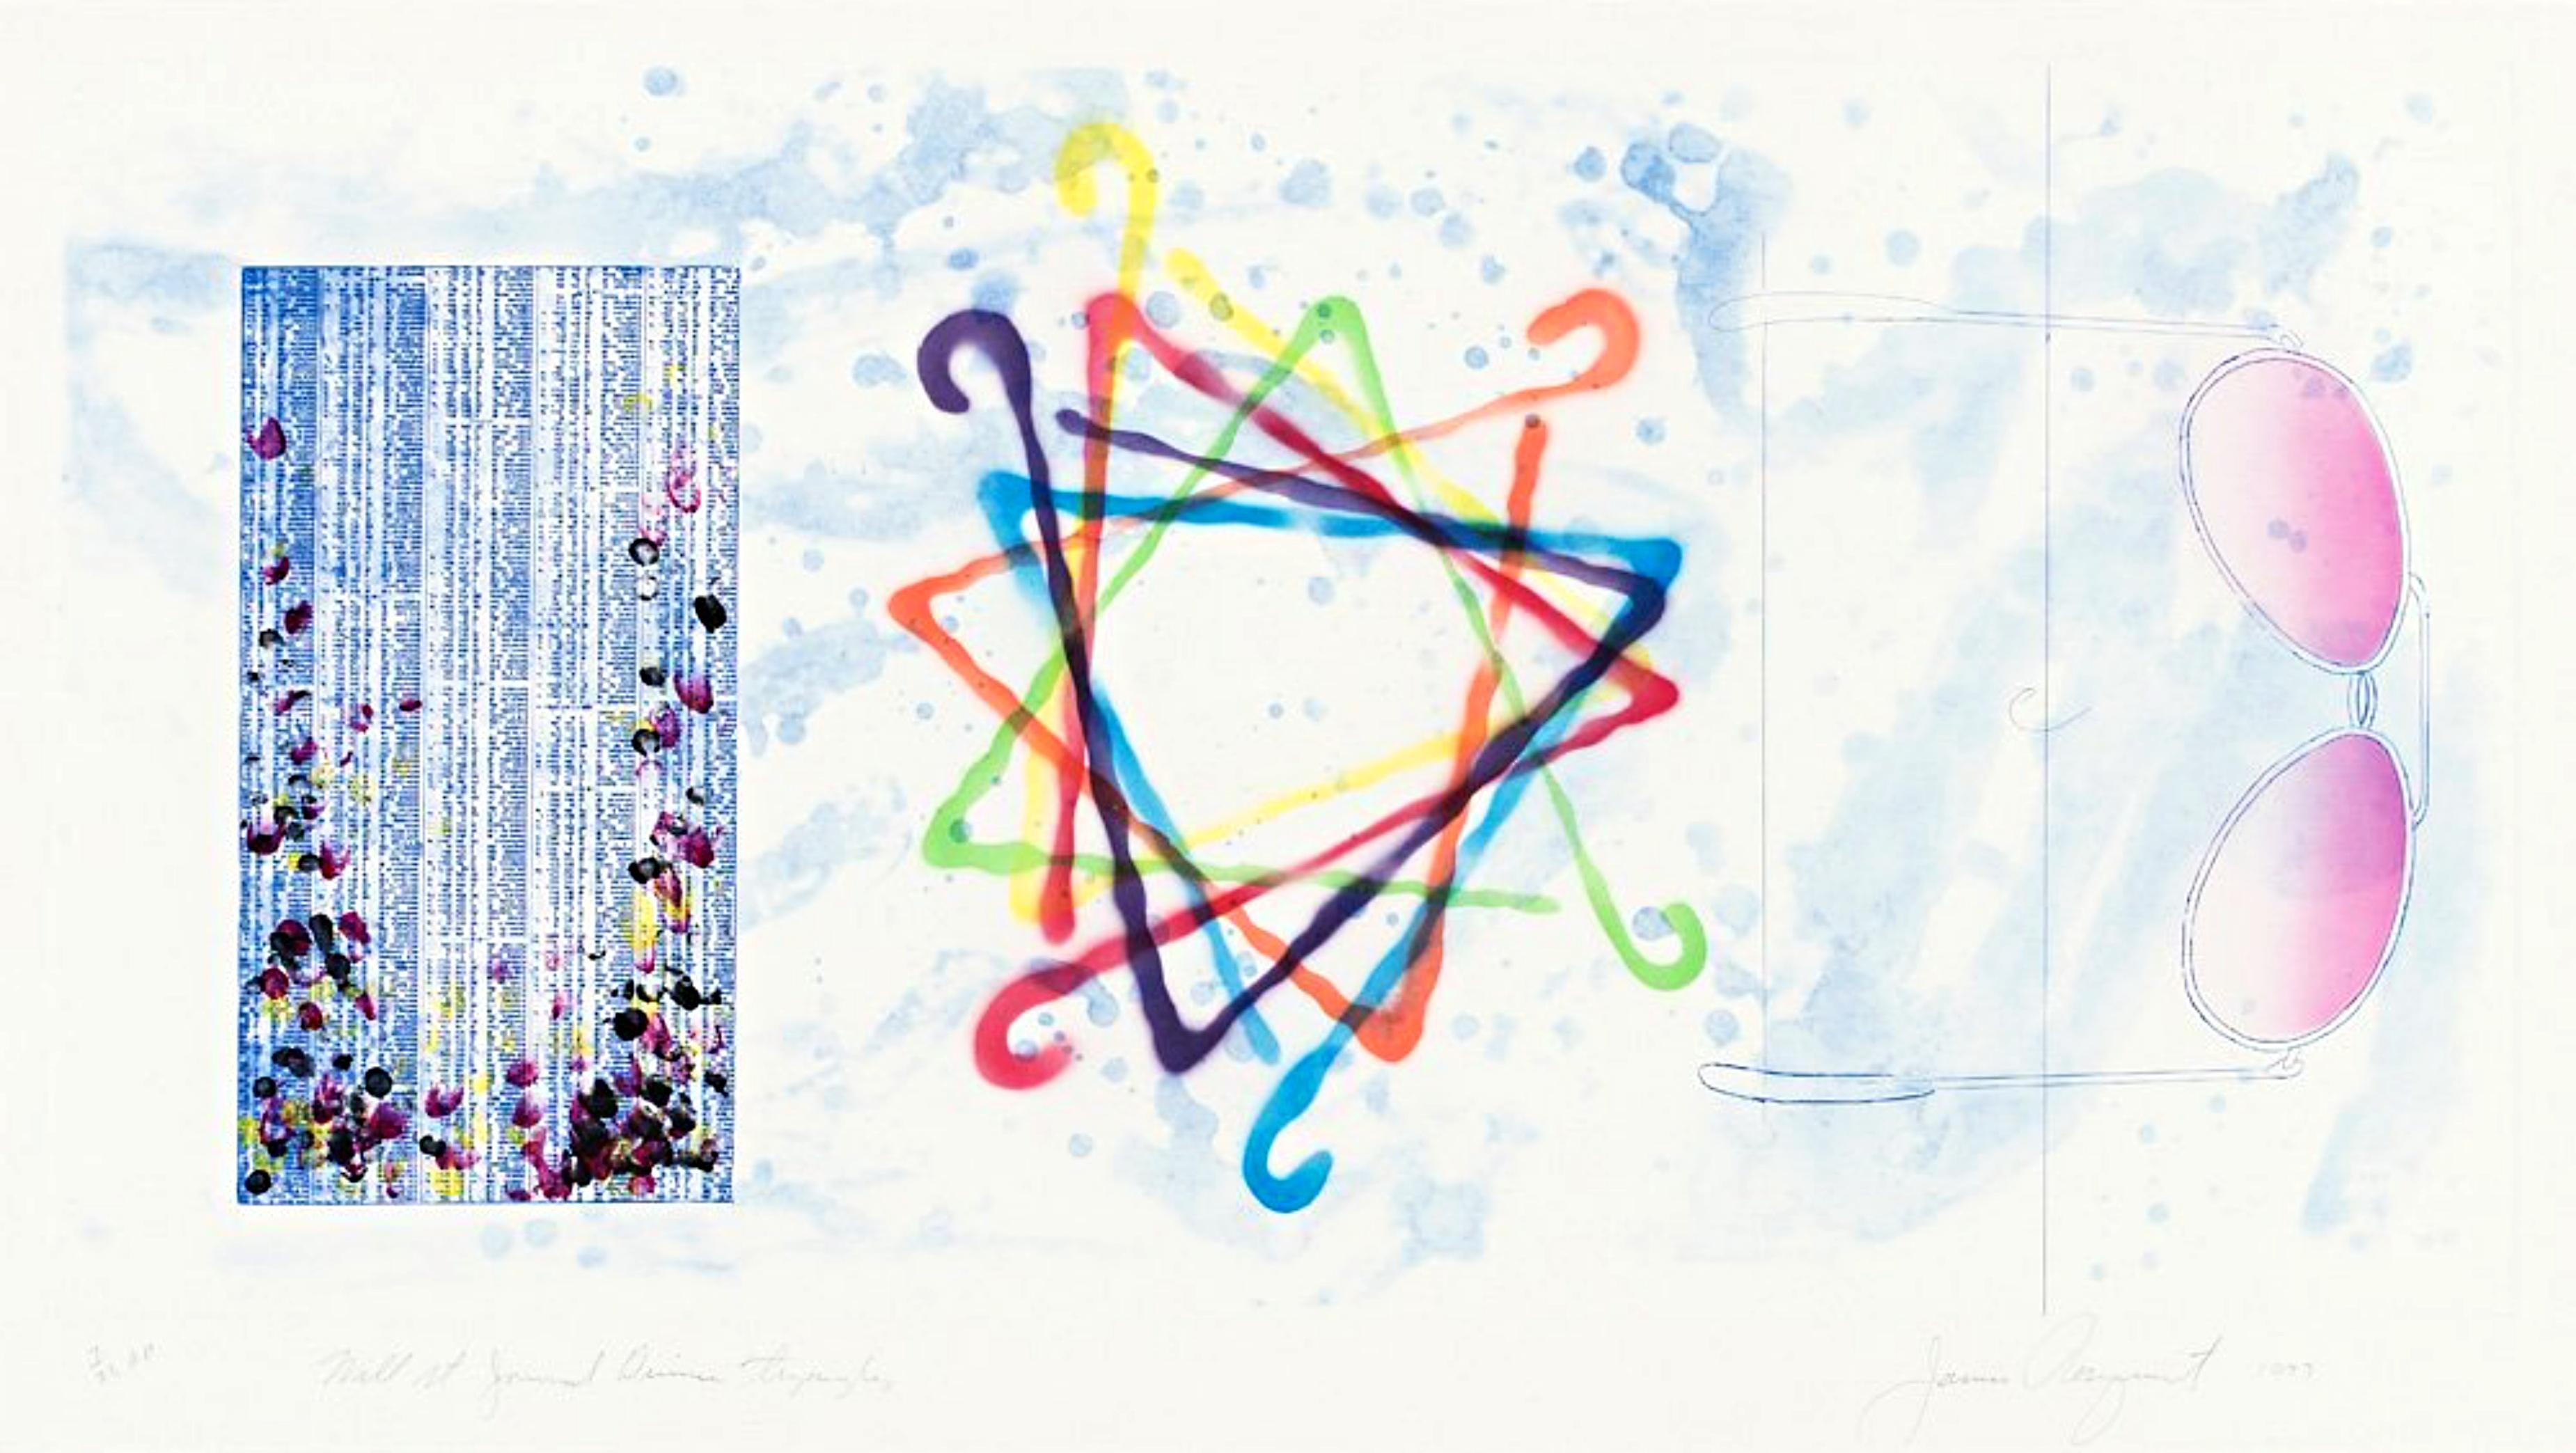 James Rosenquist Abstract Print - Wall Street Dinner Triangles (mixed media multiple with hand coloring) 116 Glenn